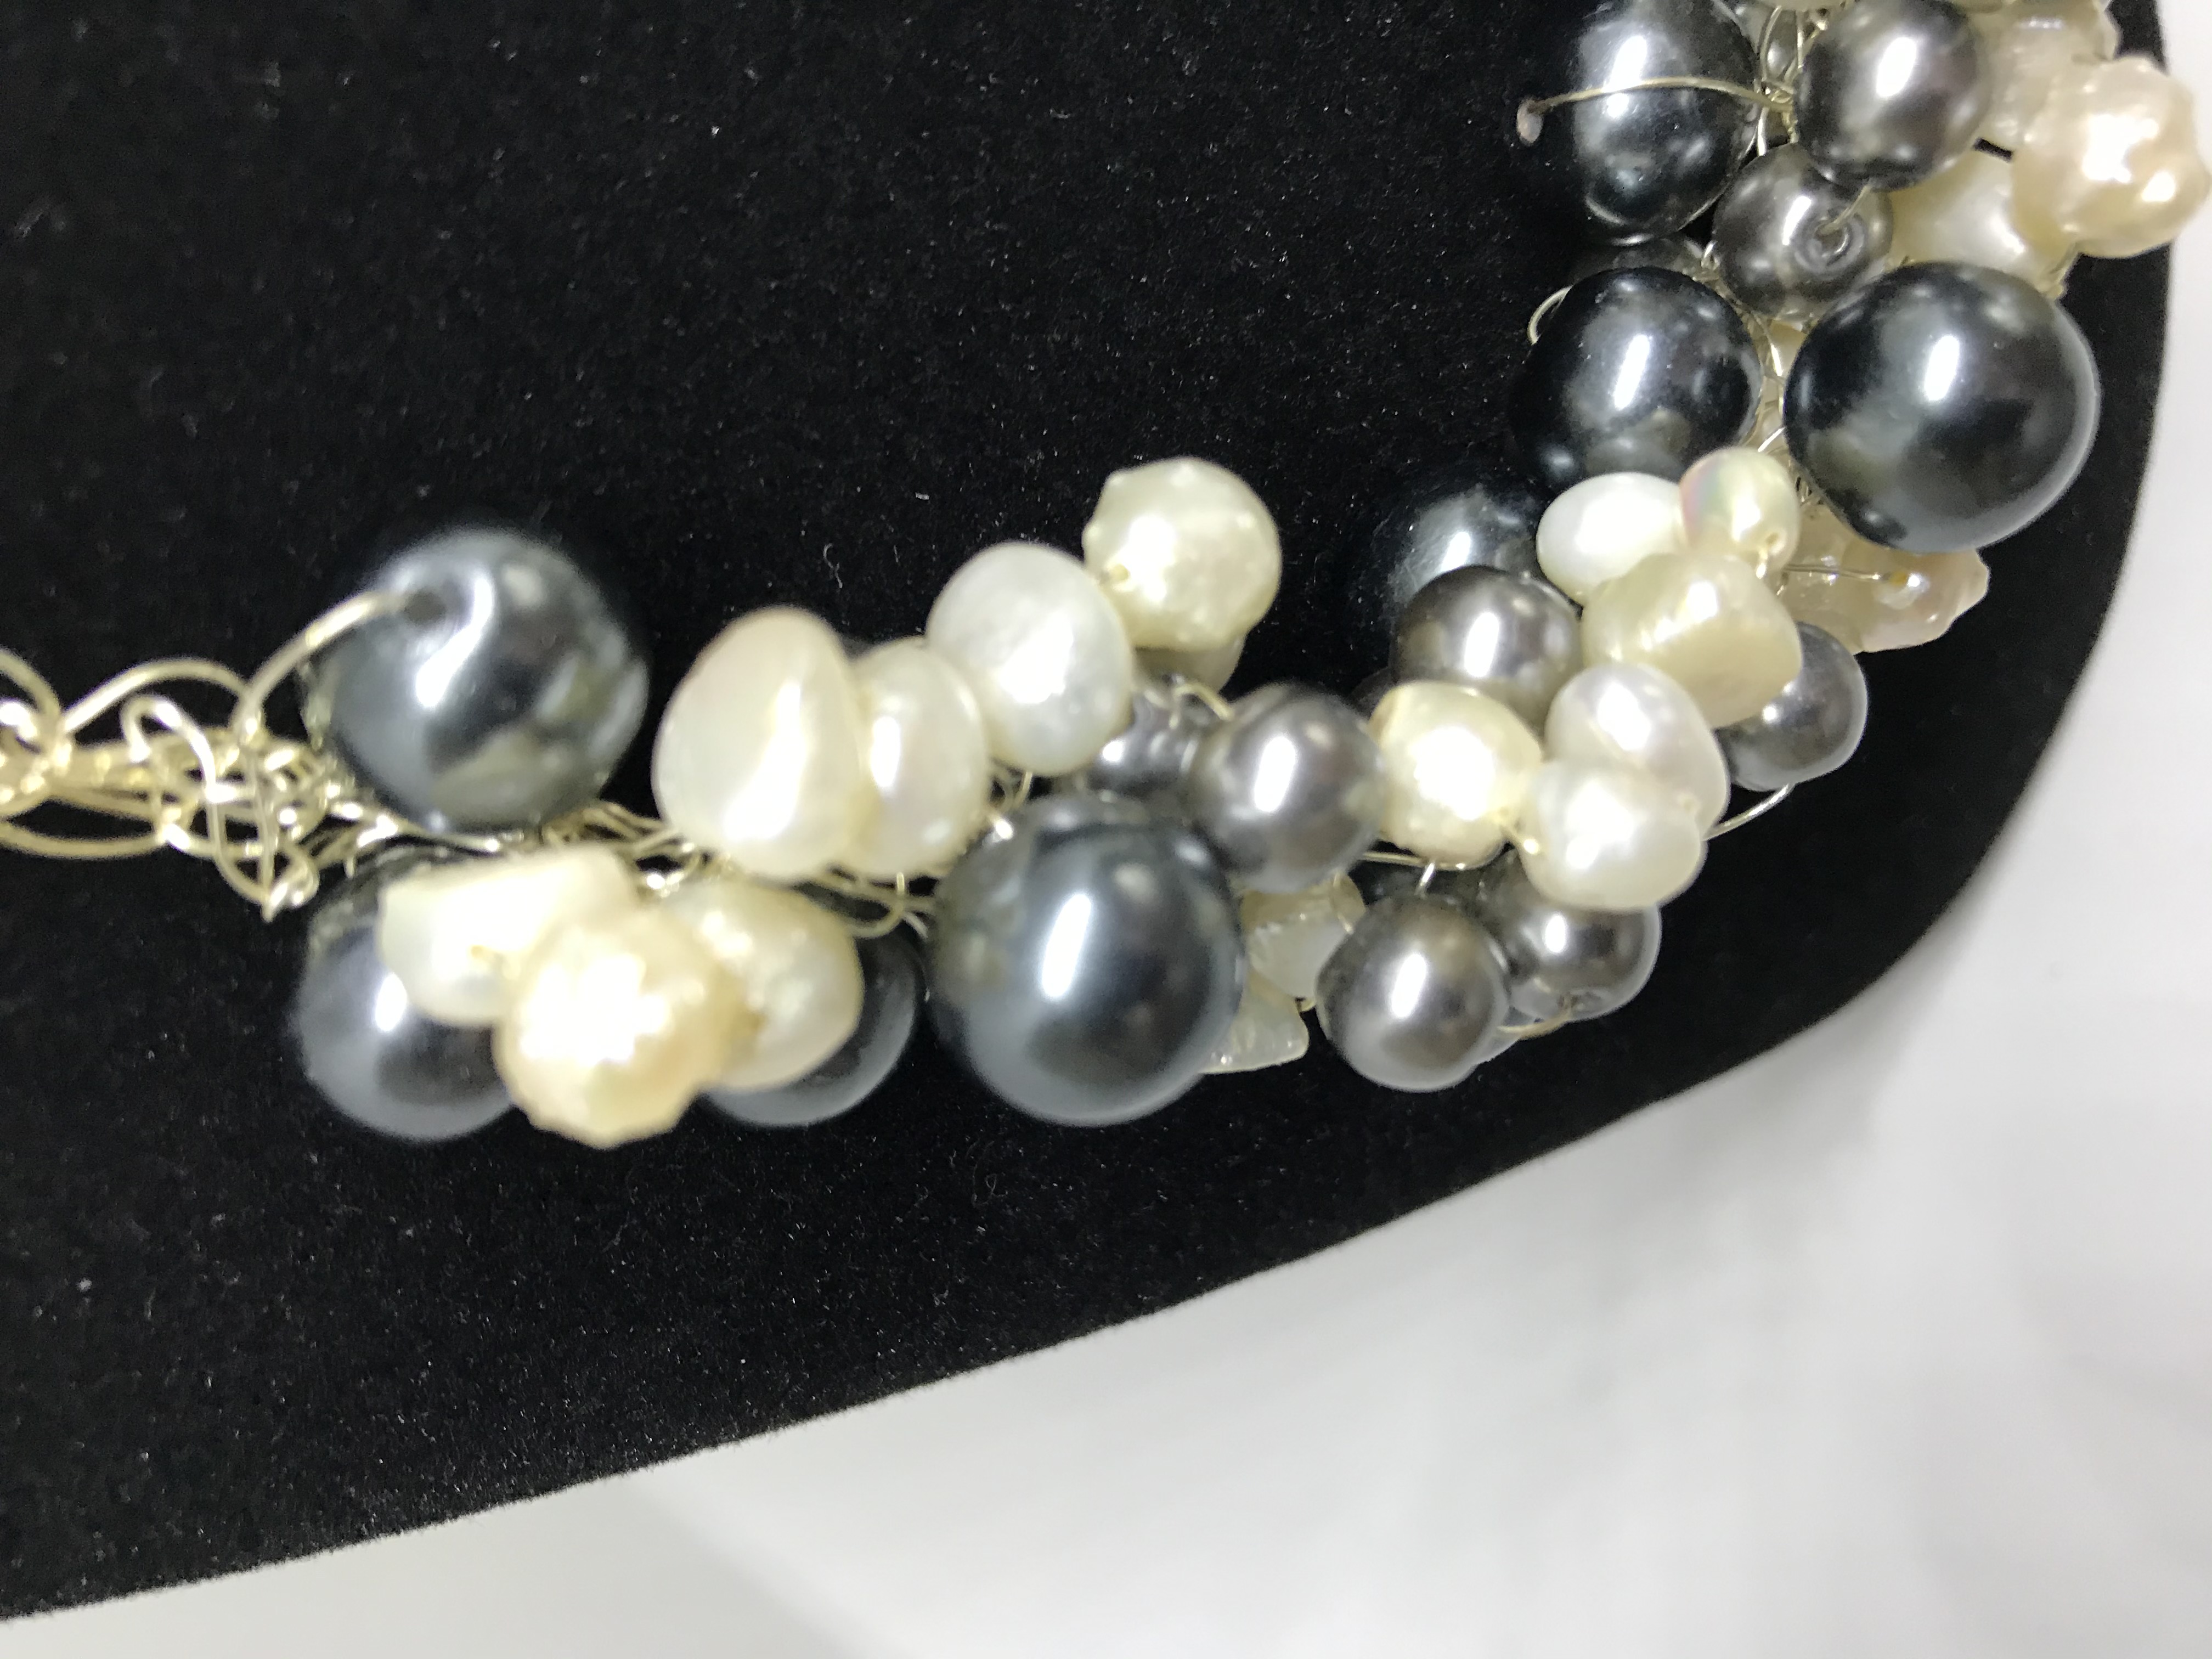 A White, Black and Grey Pearl Necklace & Earrings | Janell Jewellry